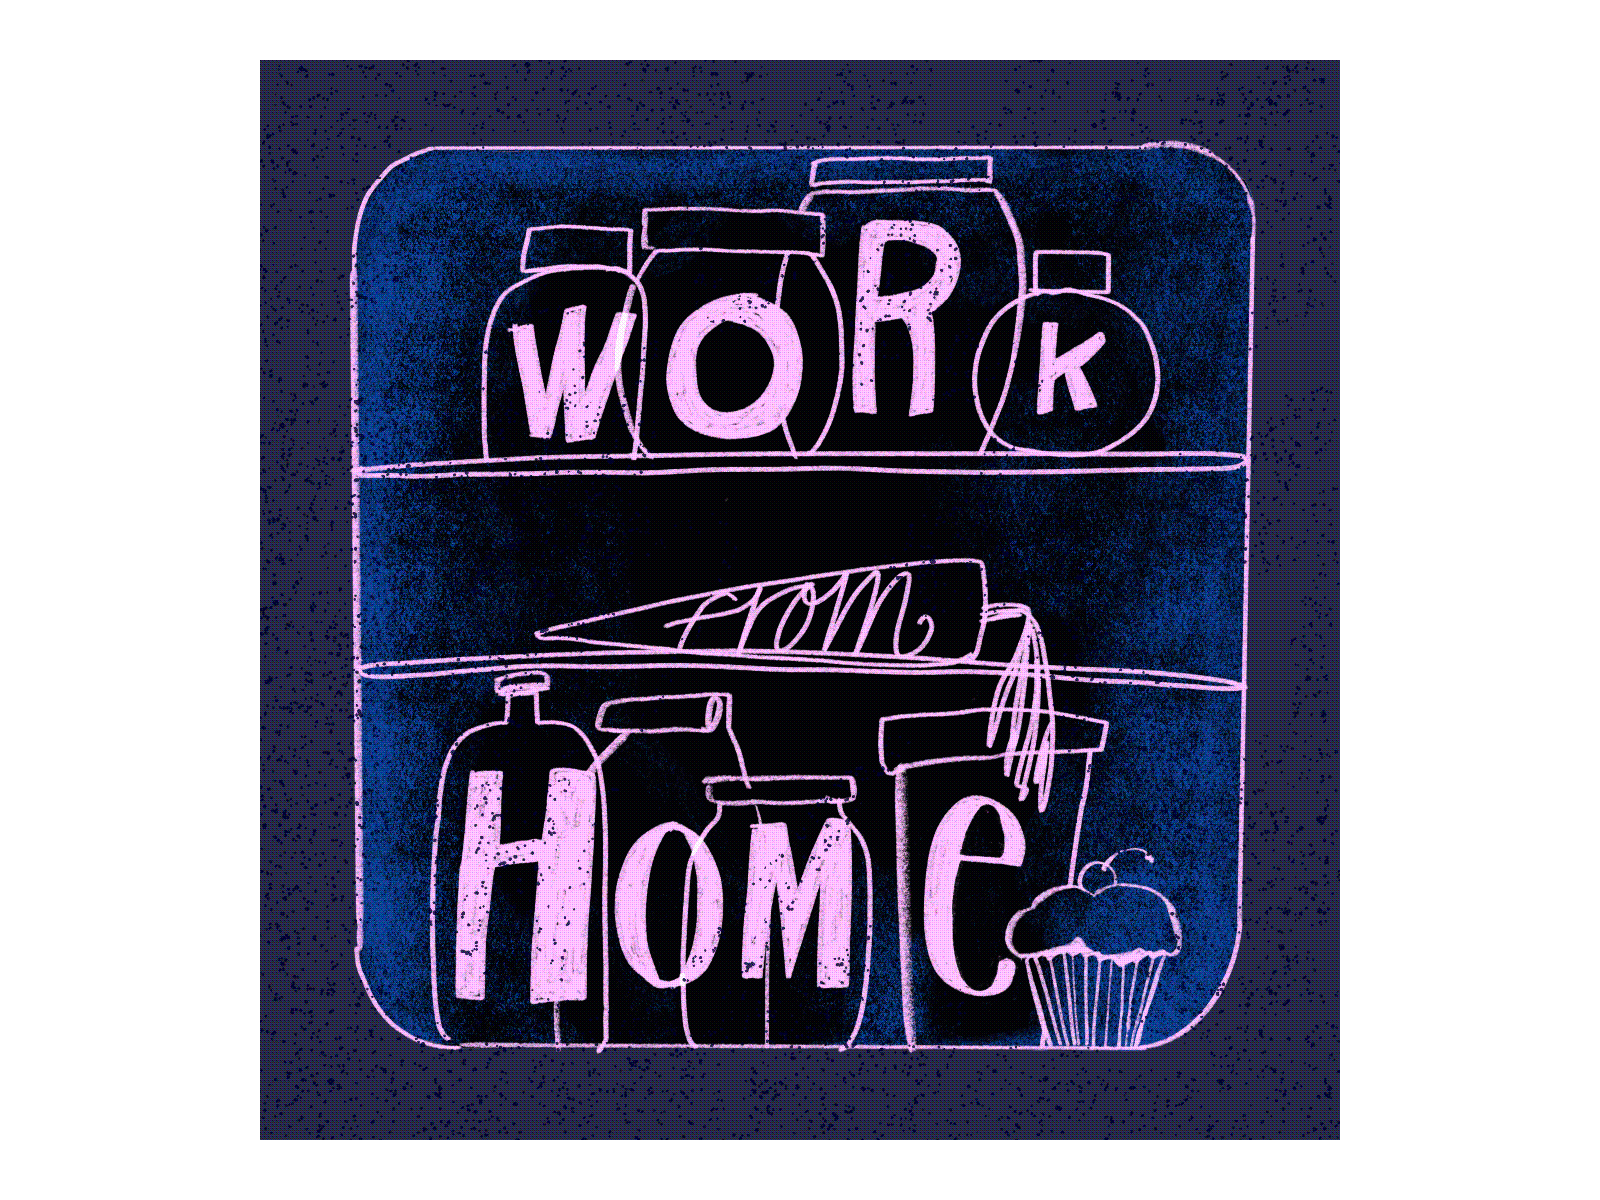 Work from home: what the fridge saw animated gif crayon handdrawn illustration pencil work from home